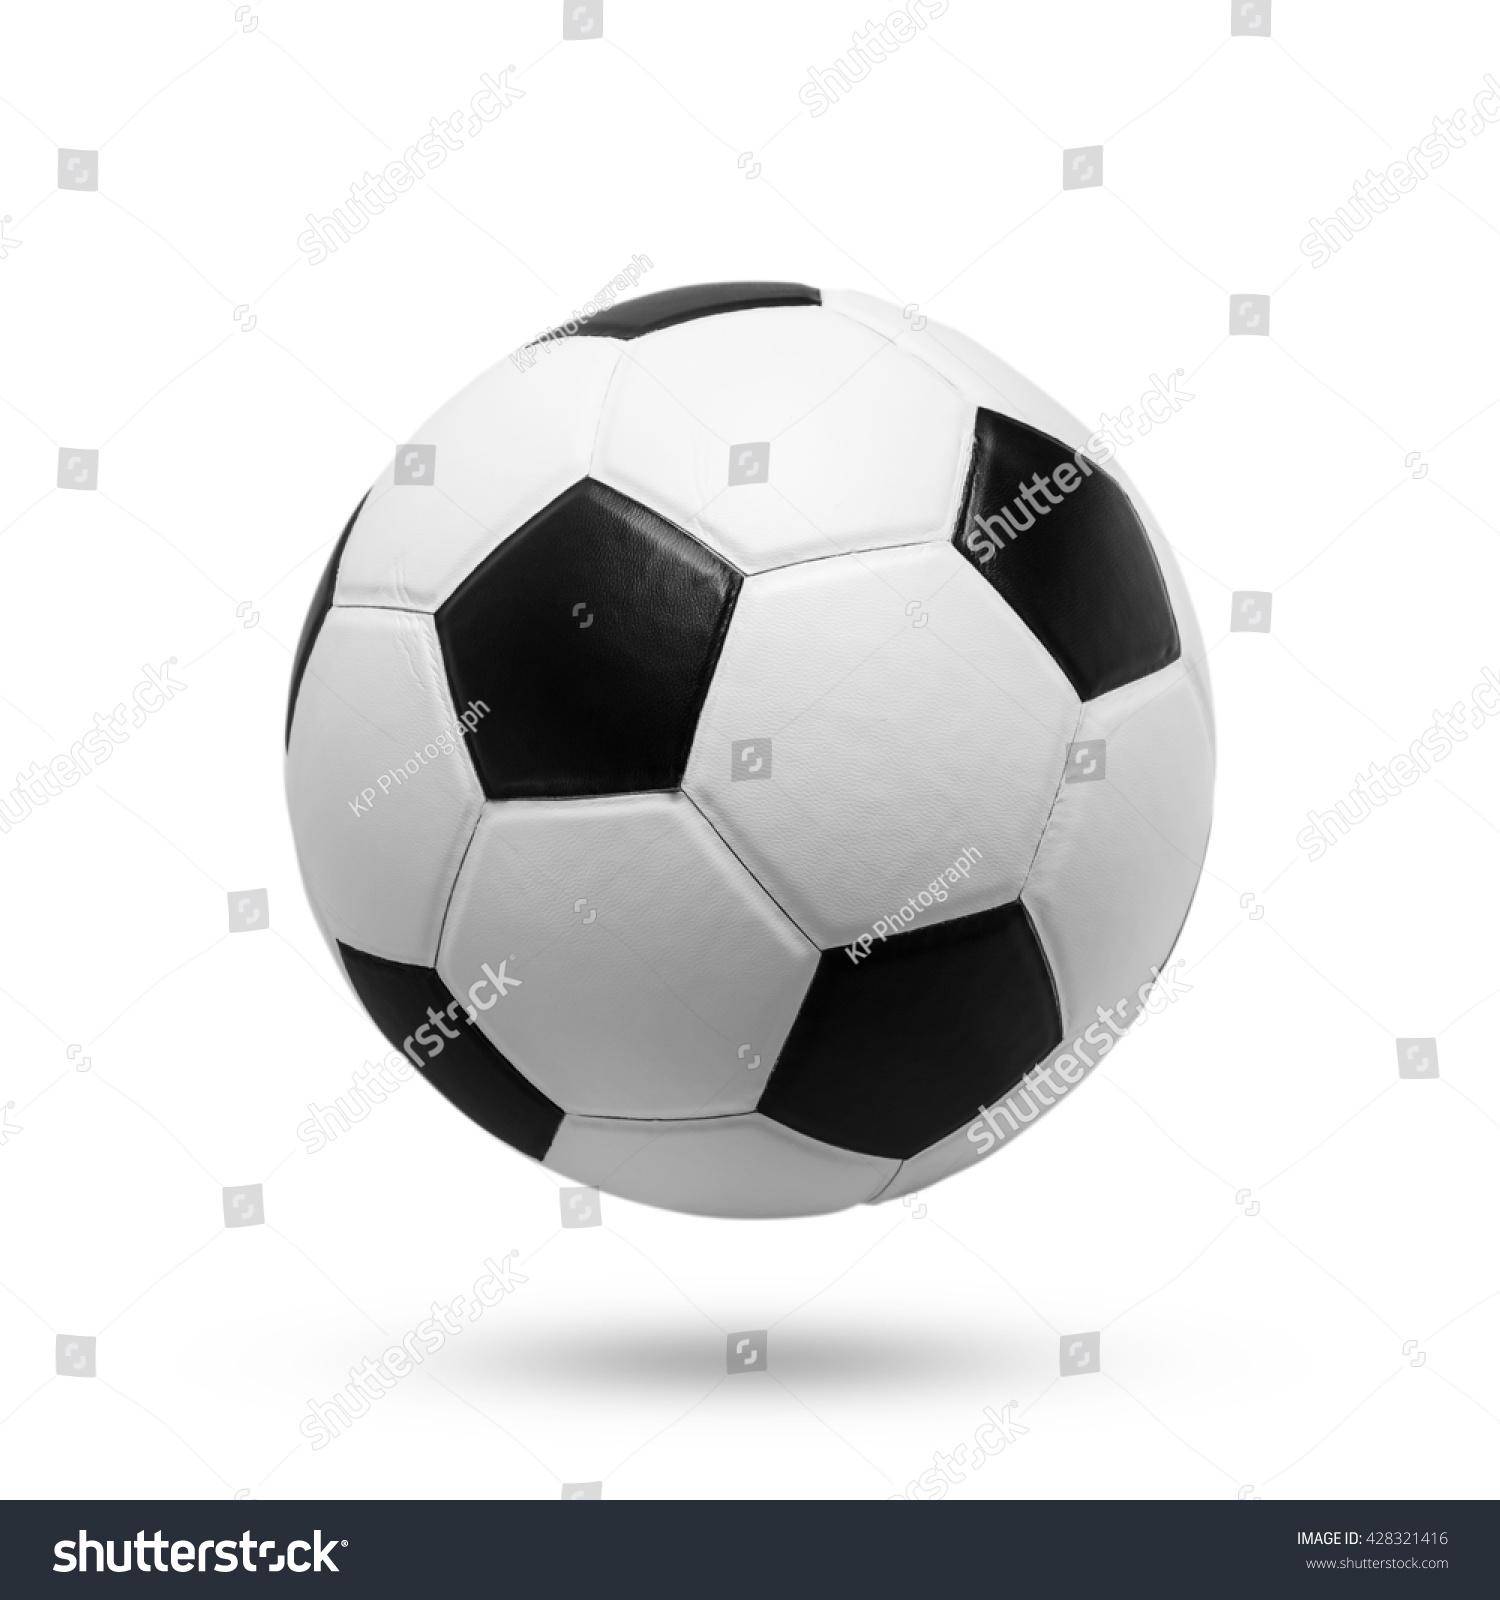 soccer ball isolated on white background. #428321416